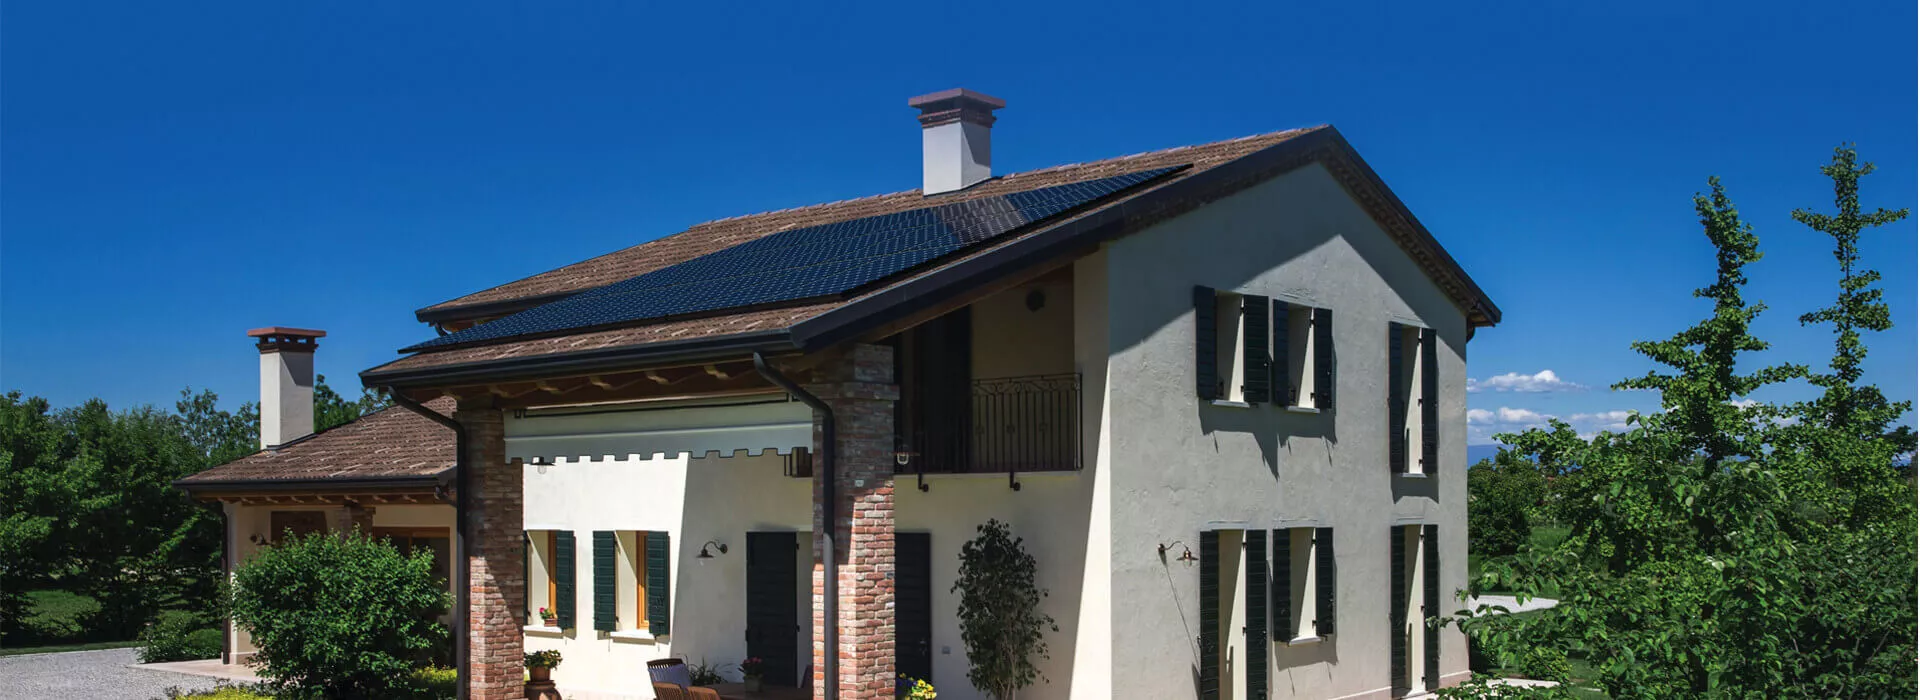 Italian home with rooftop solar panels